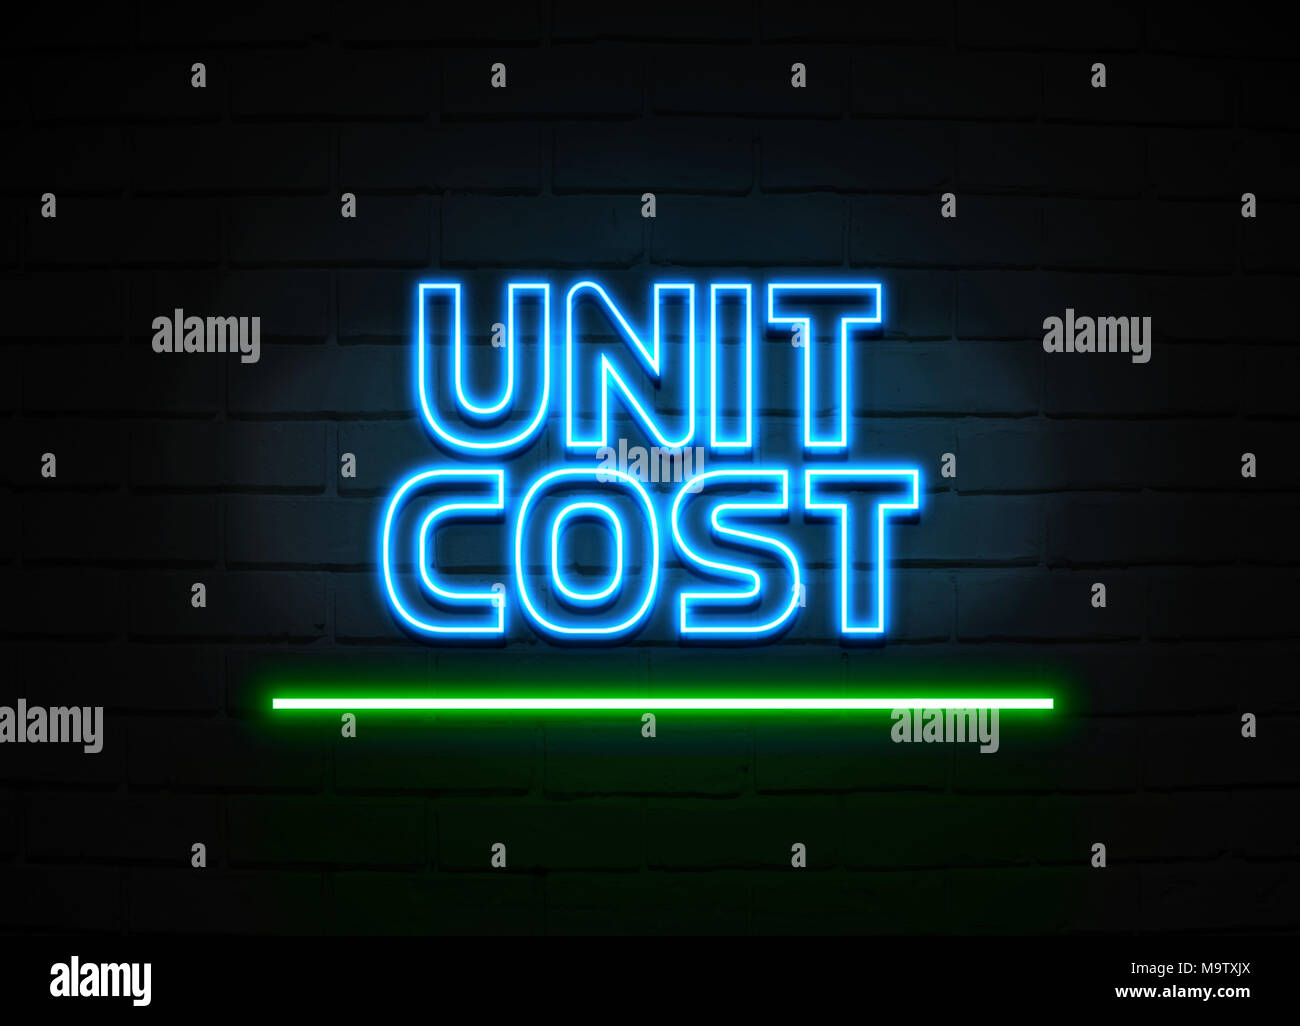 Unit Cost neon sign - Glowing Neon Sign on brickwall wall - 3D rendered royalty free stock illustration. Stock Photo